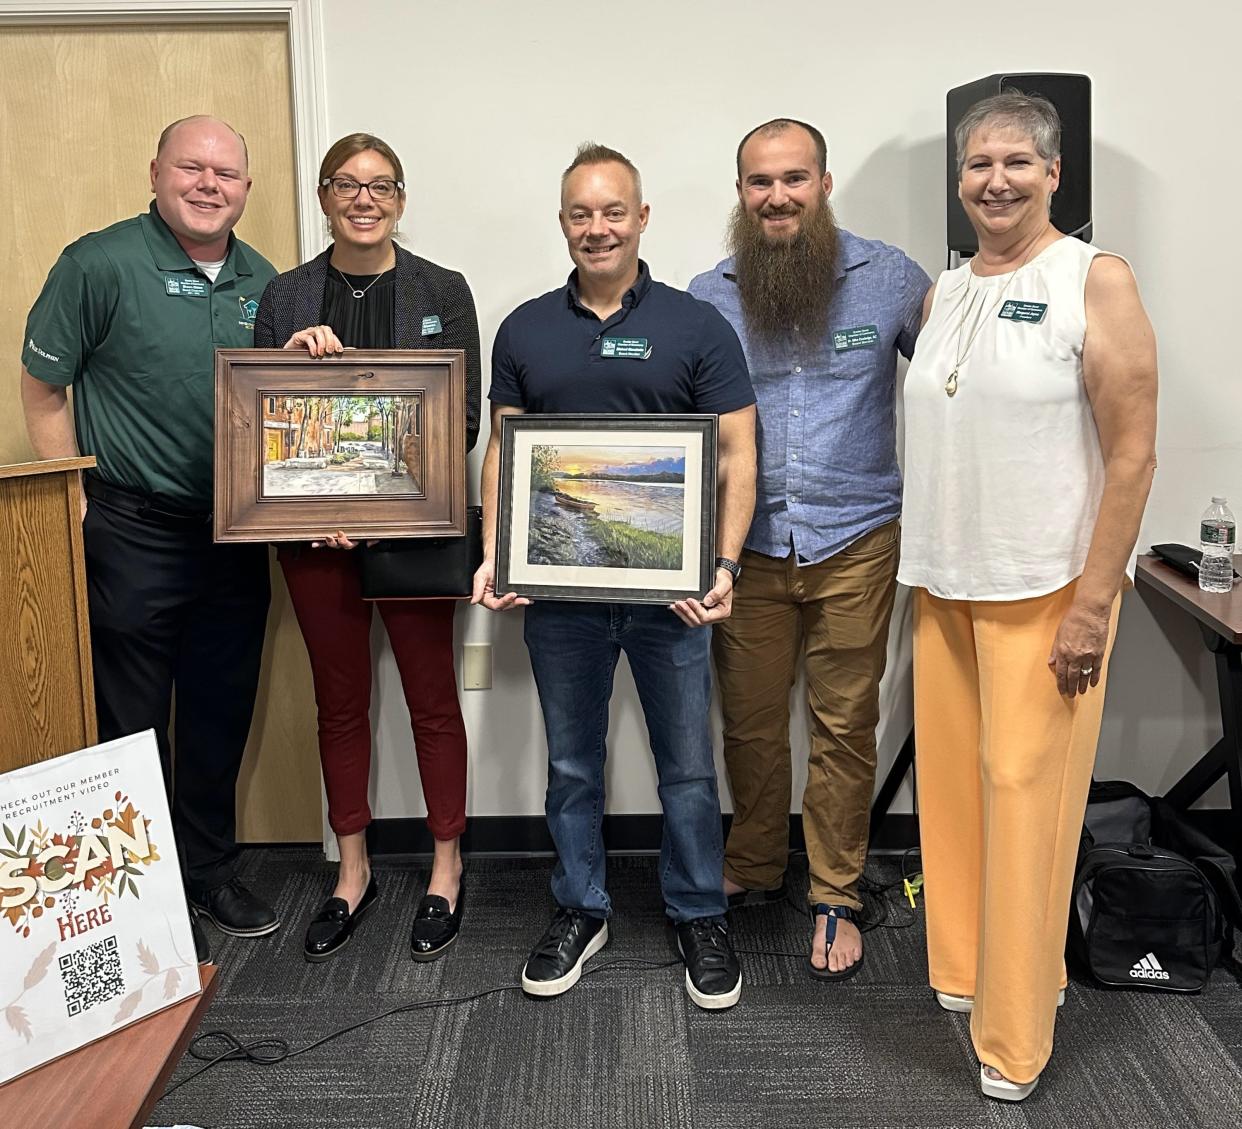 The Greater Dover Chamber of Commerce presented outgoing board members Kelly Glennon of Jewelry Creations and Mike Blanchette of Liberty Mutual Insurance with framed artwork by Dover artists Susan E. Hanna. From left to right are Shawn Olsten, Townsquare Media; Glennon; Blanchette; Dr. Mike Cooledge, Thrive Family Chiropractic; and GDCC President Margaret Joyce.